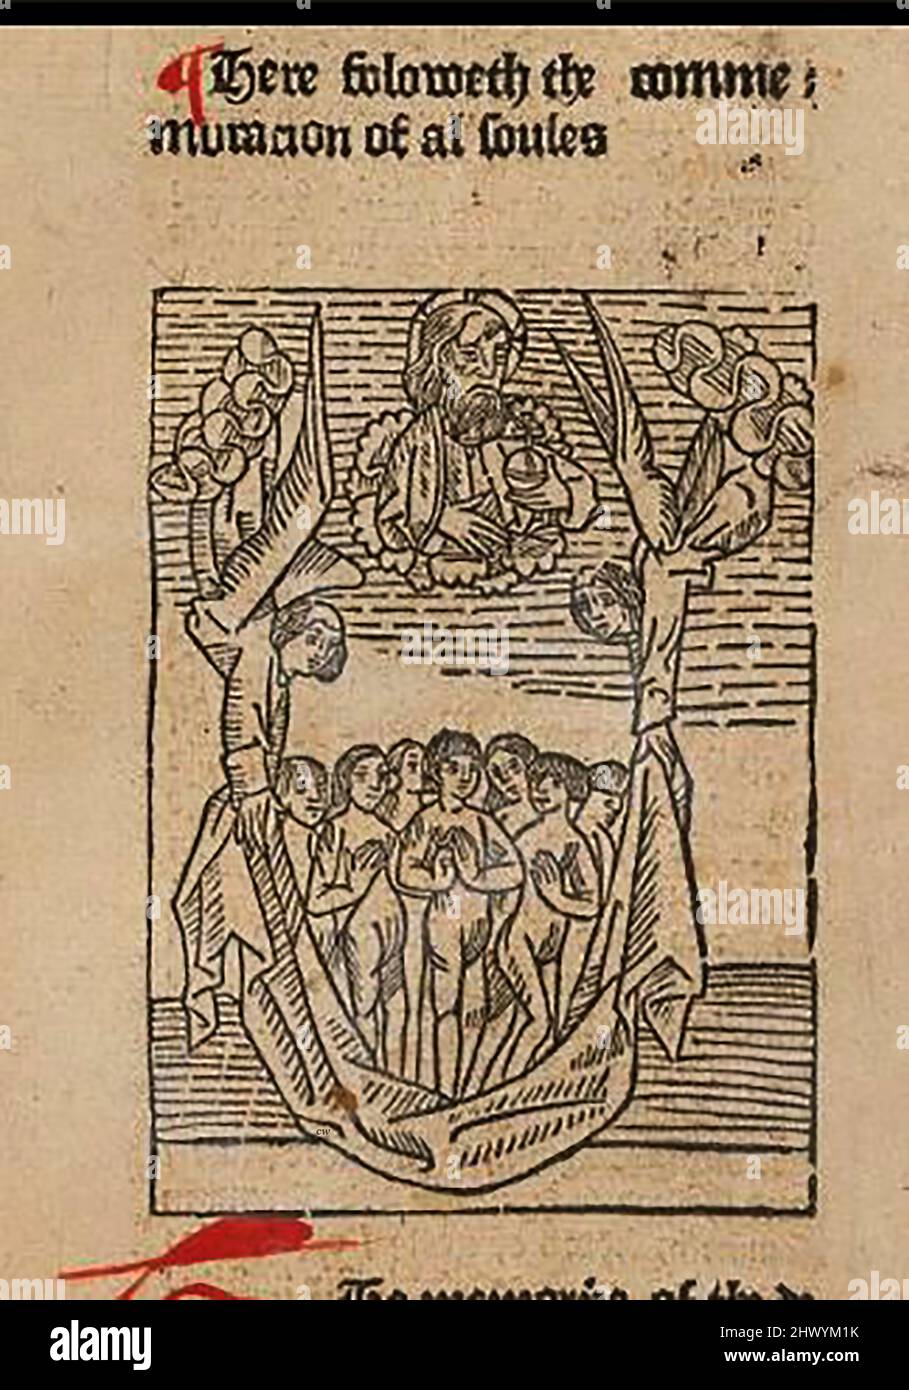 15th century woodcut showing the weighing of souls on All Hallows Eve (Halloween) printed by William Caxton ( 1422-1491/92) in his translation of  'The Golden Legend' or  'Thus endeth the legende named in Latyn legenda aurea that is to saye in Englysshe the golden legende' by Jacobus, de Voragine, (Circa 1229-1298). Stock Photo